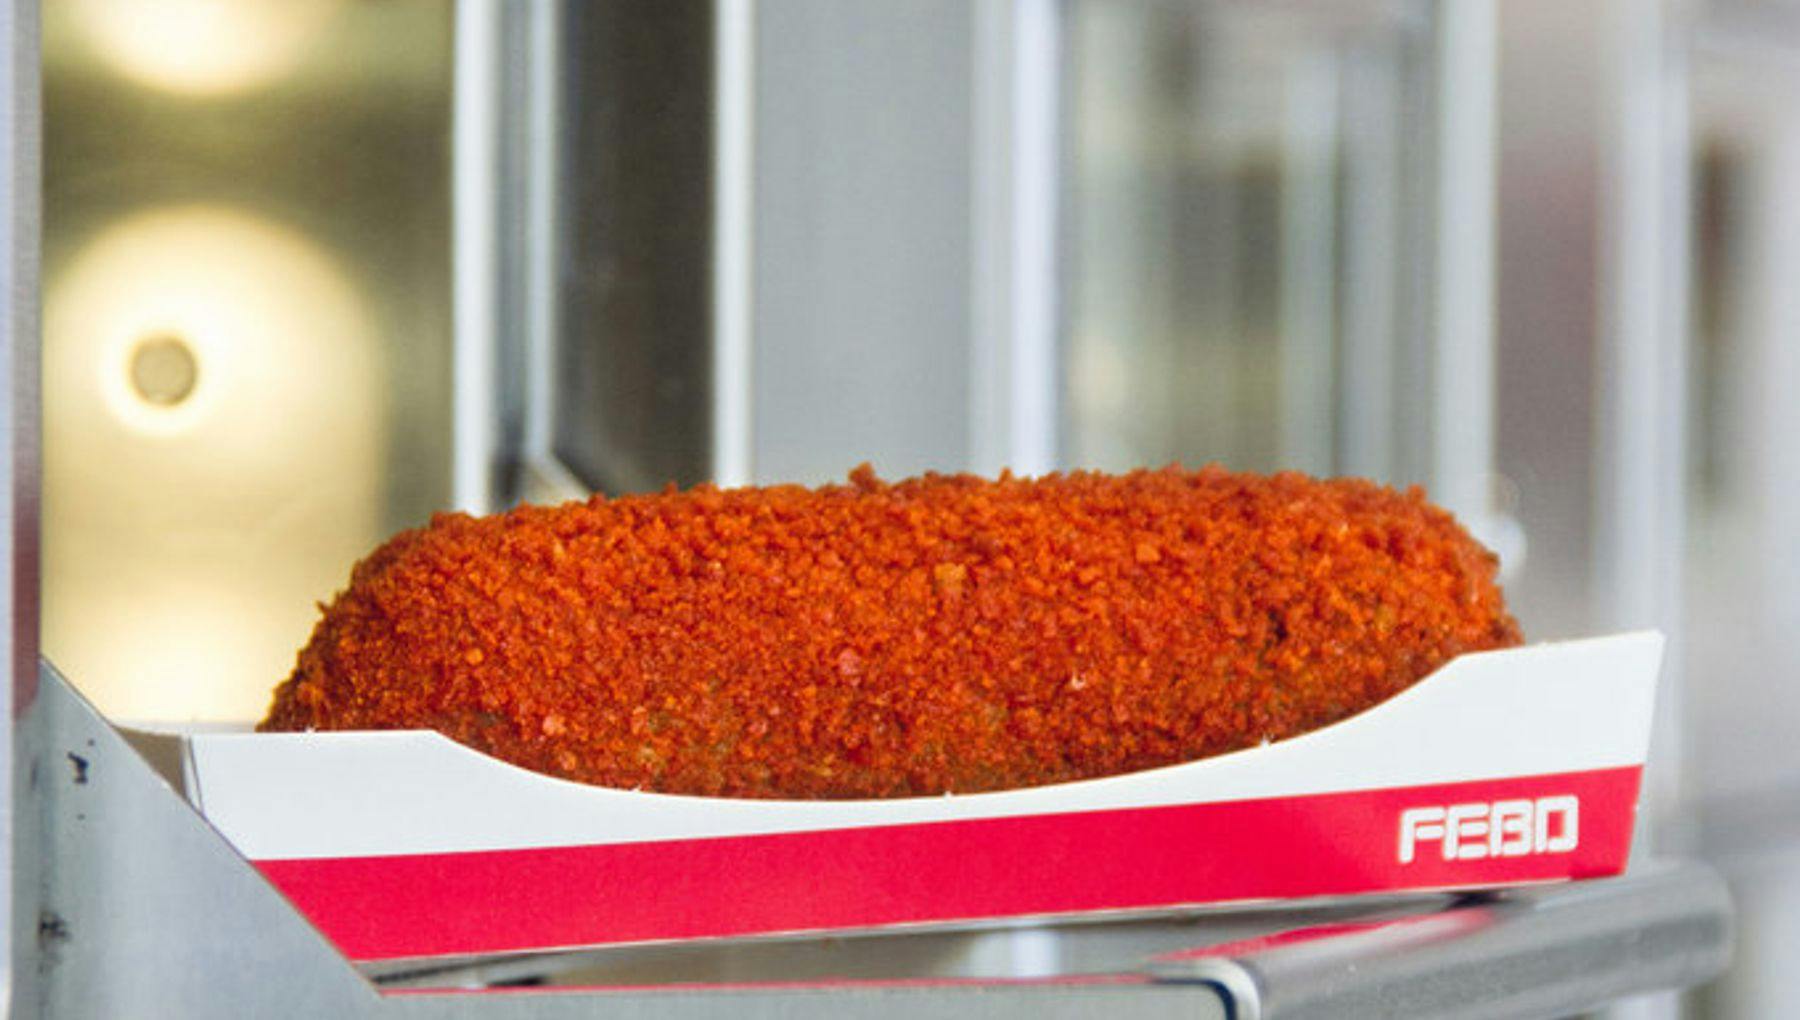 FEBO kroket croquette from vending machine automaat